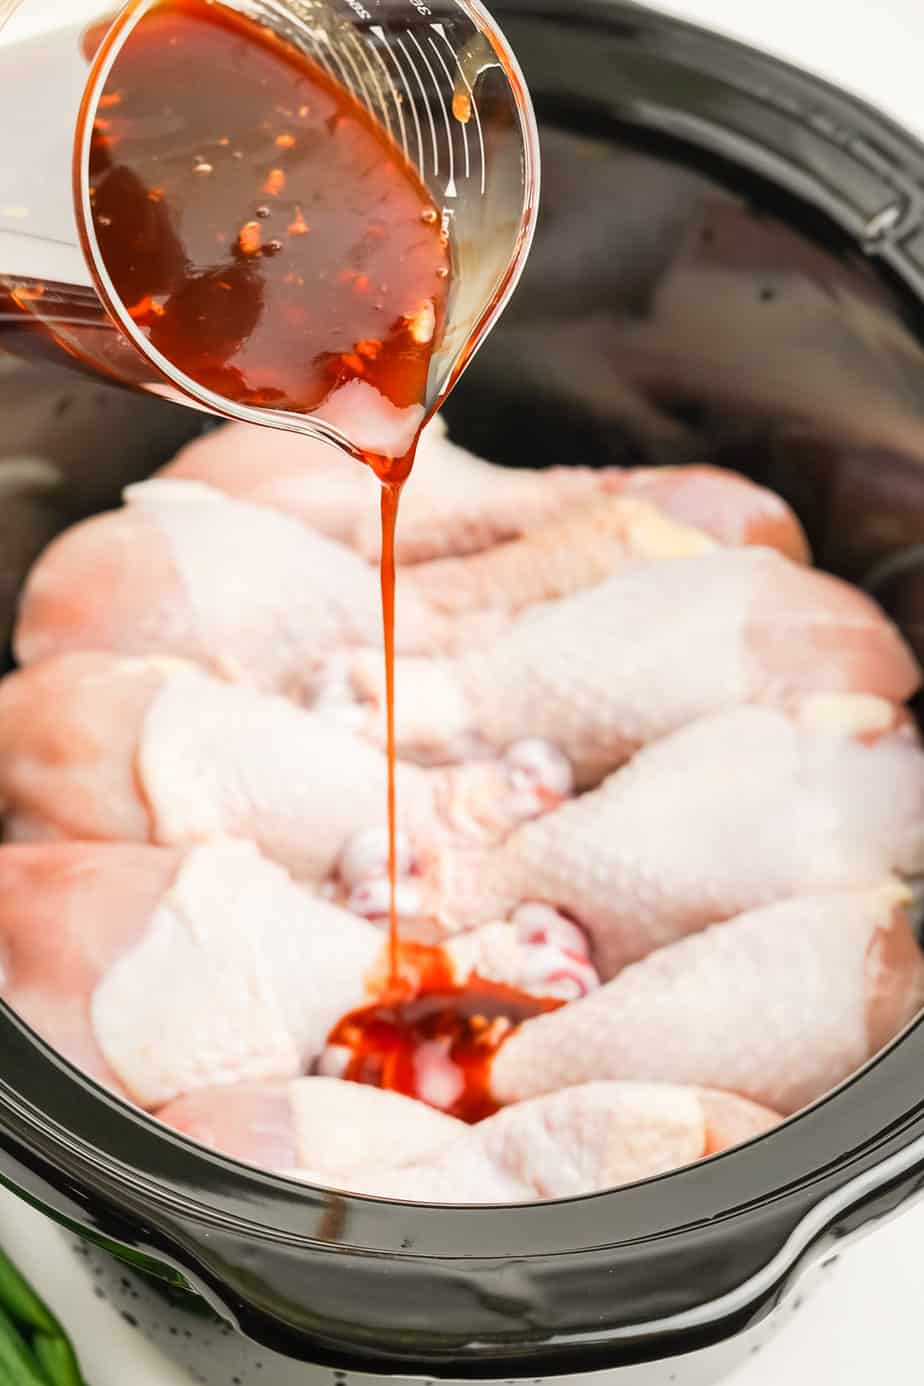 A slowcoooker full of raw chicken legs from the side with a hand pouring a sauce over the chicken from a bowl above.